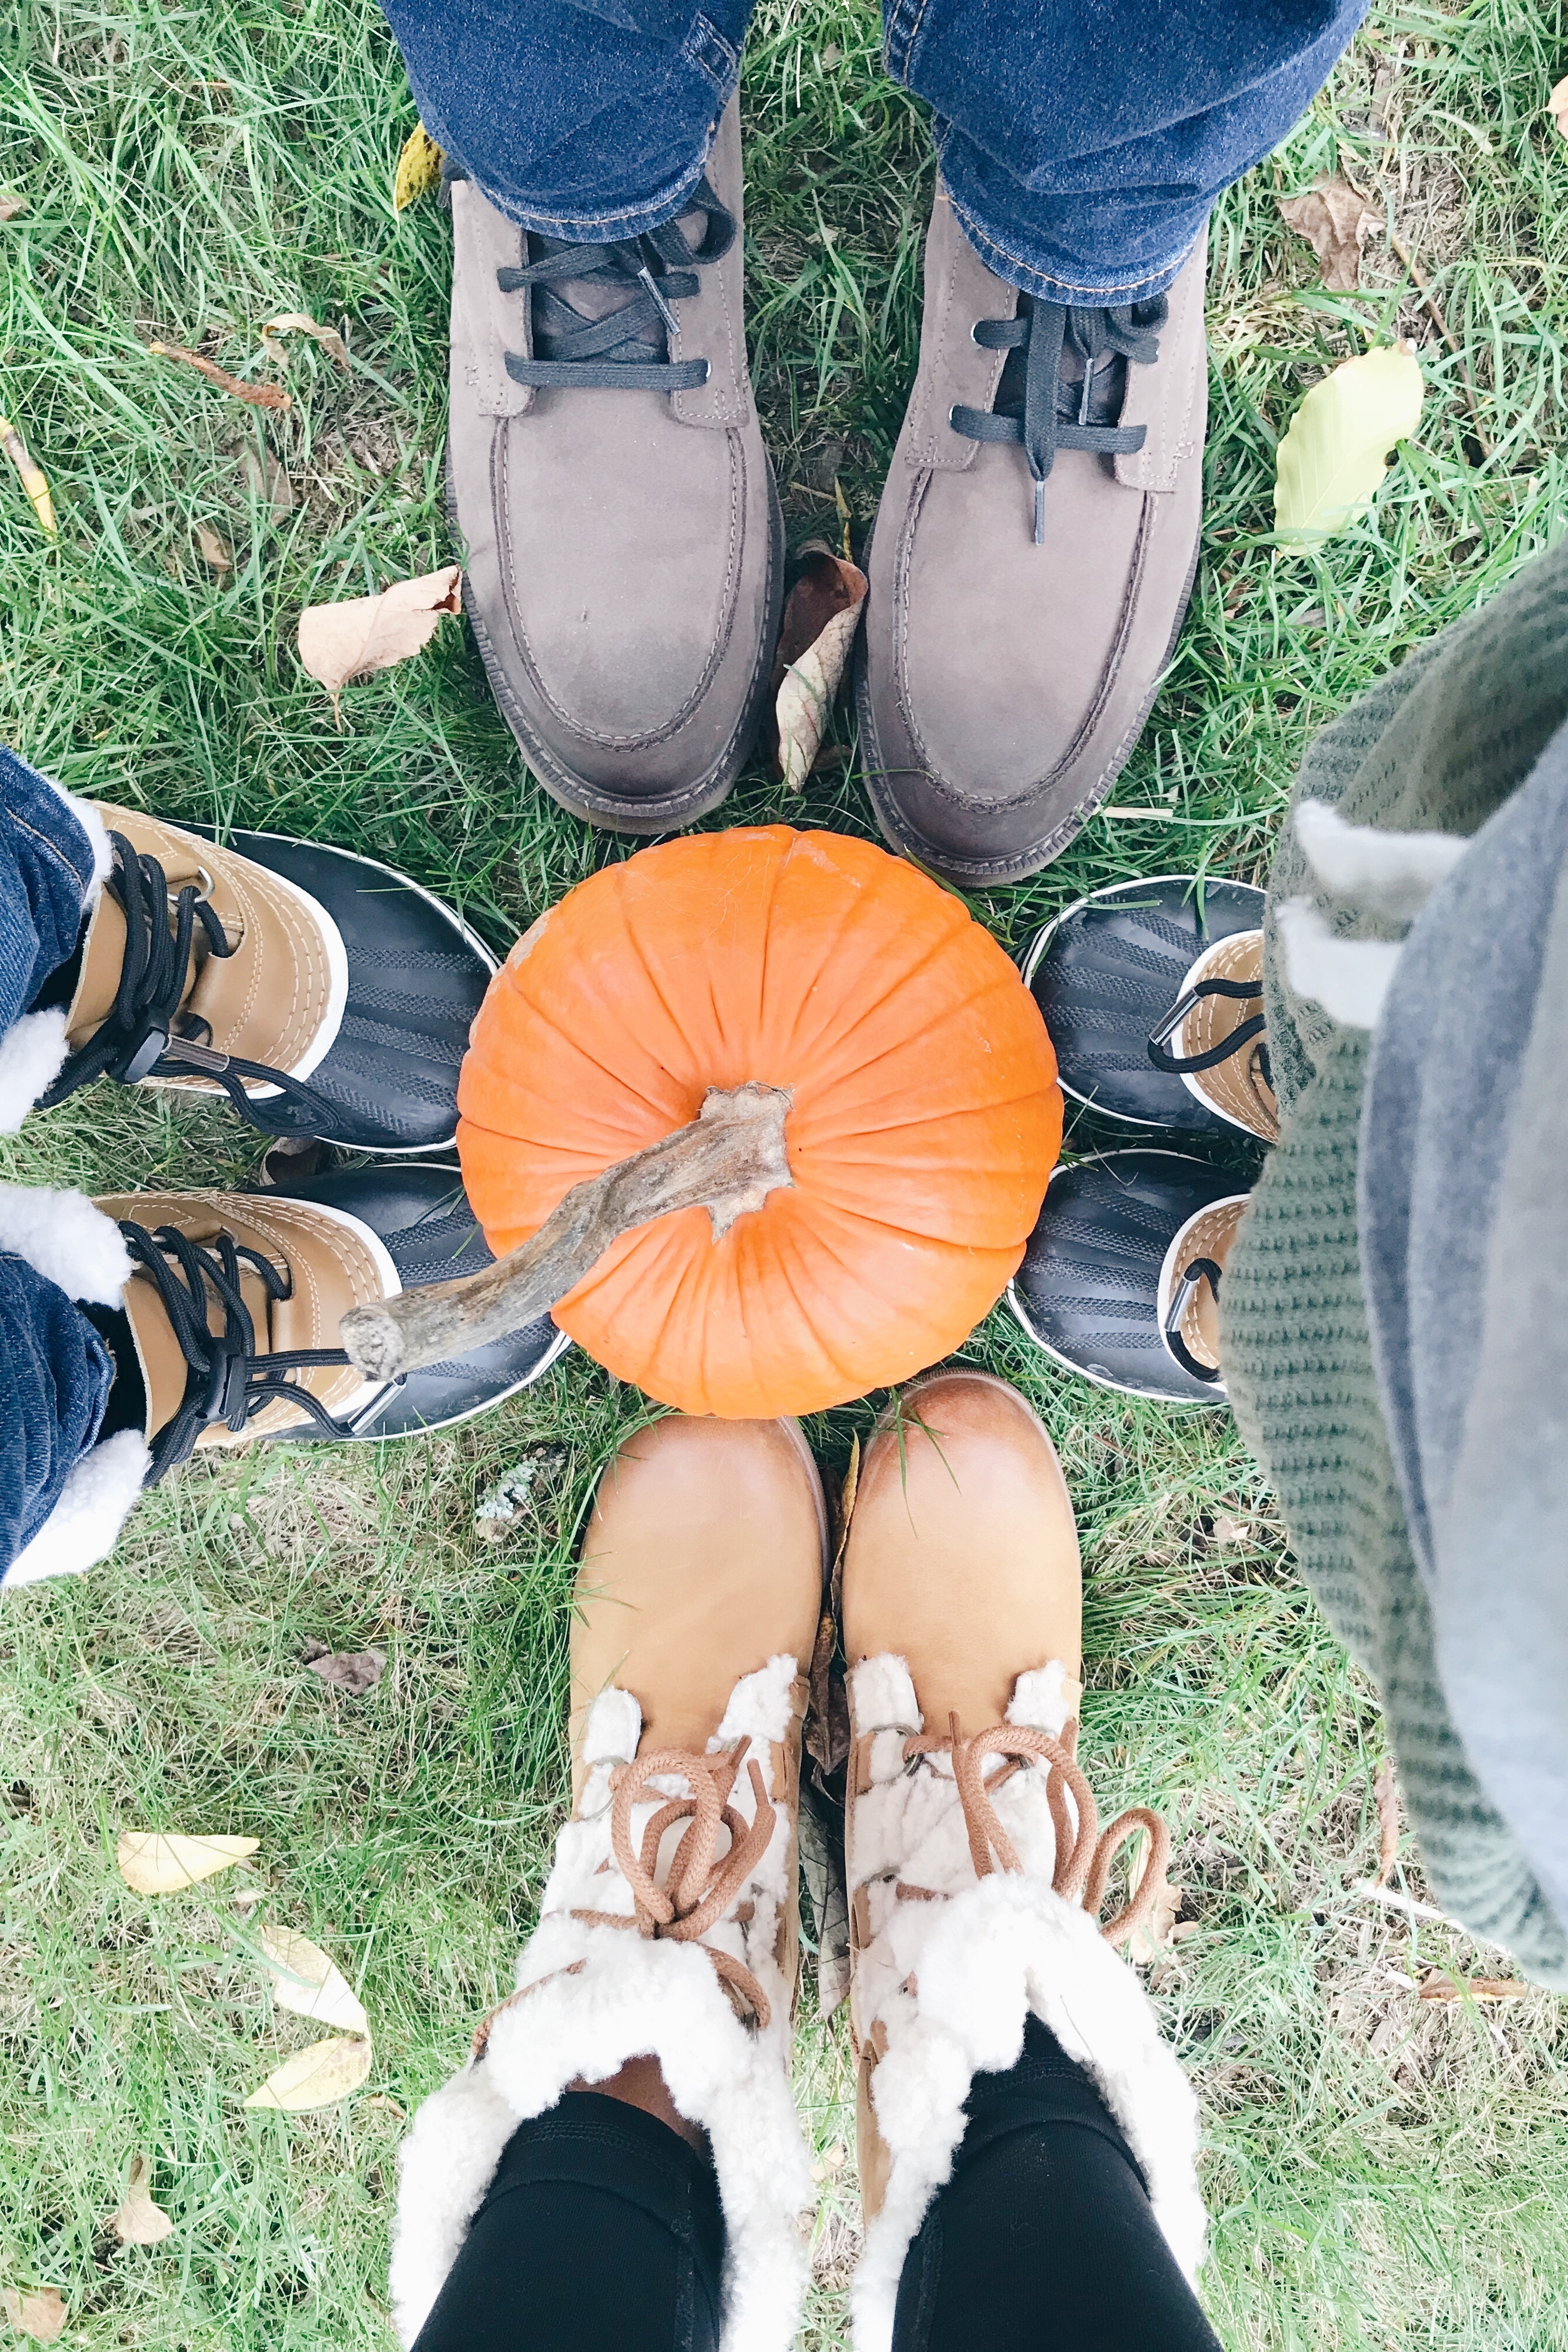 family in sorel boots - fall activities for kids in connecticut